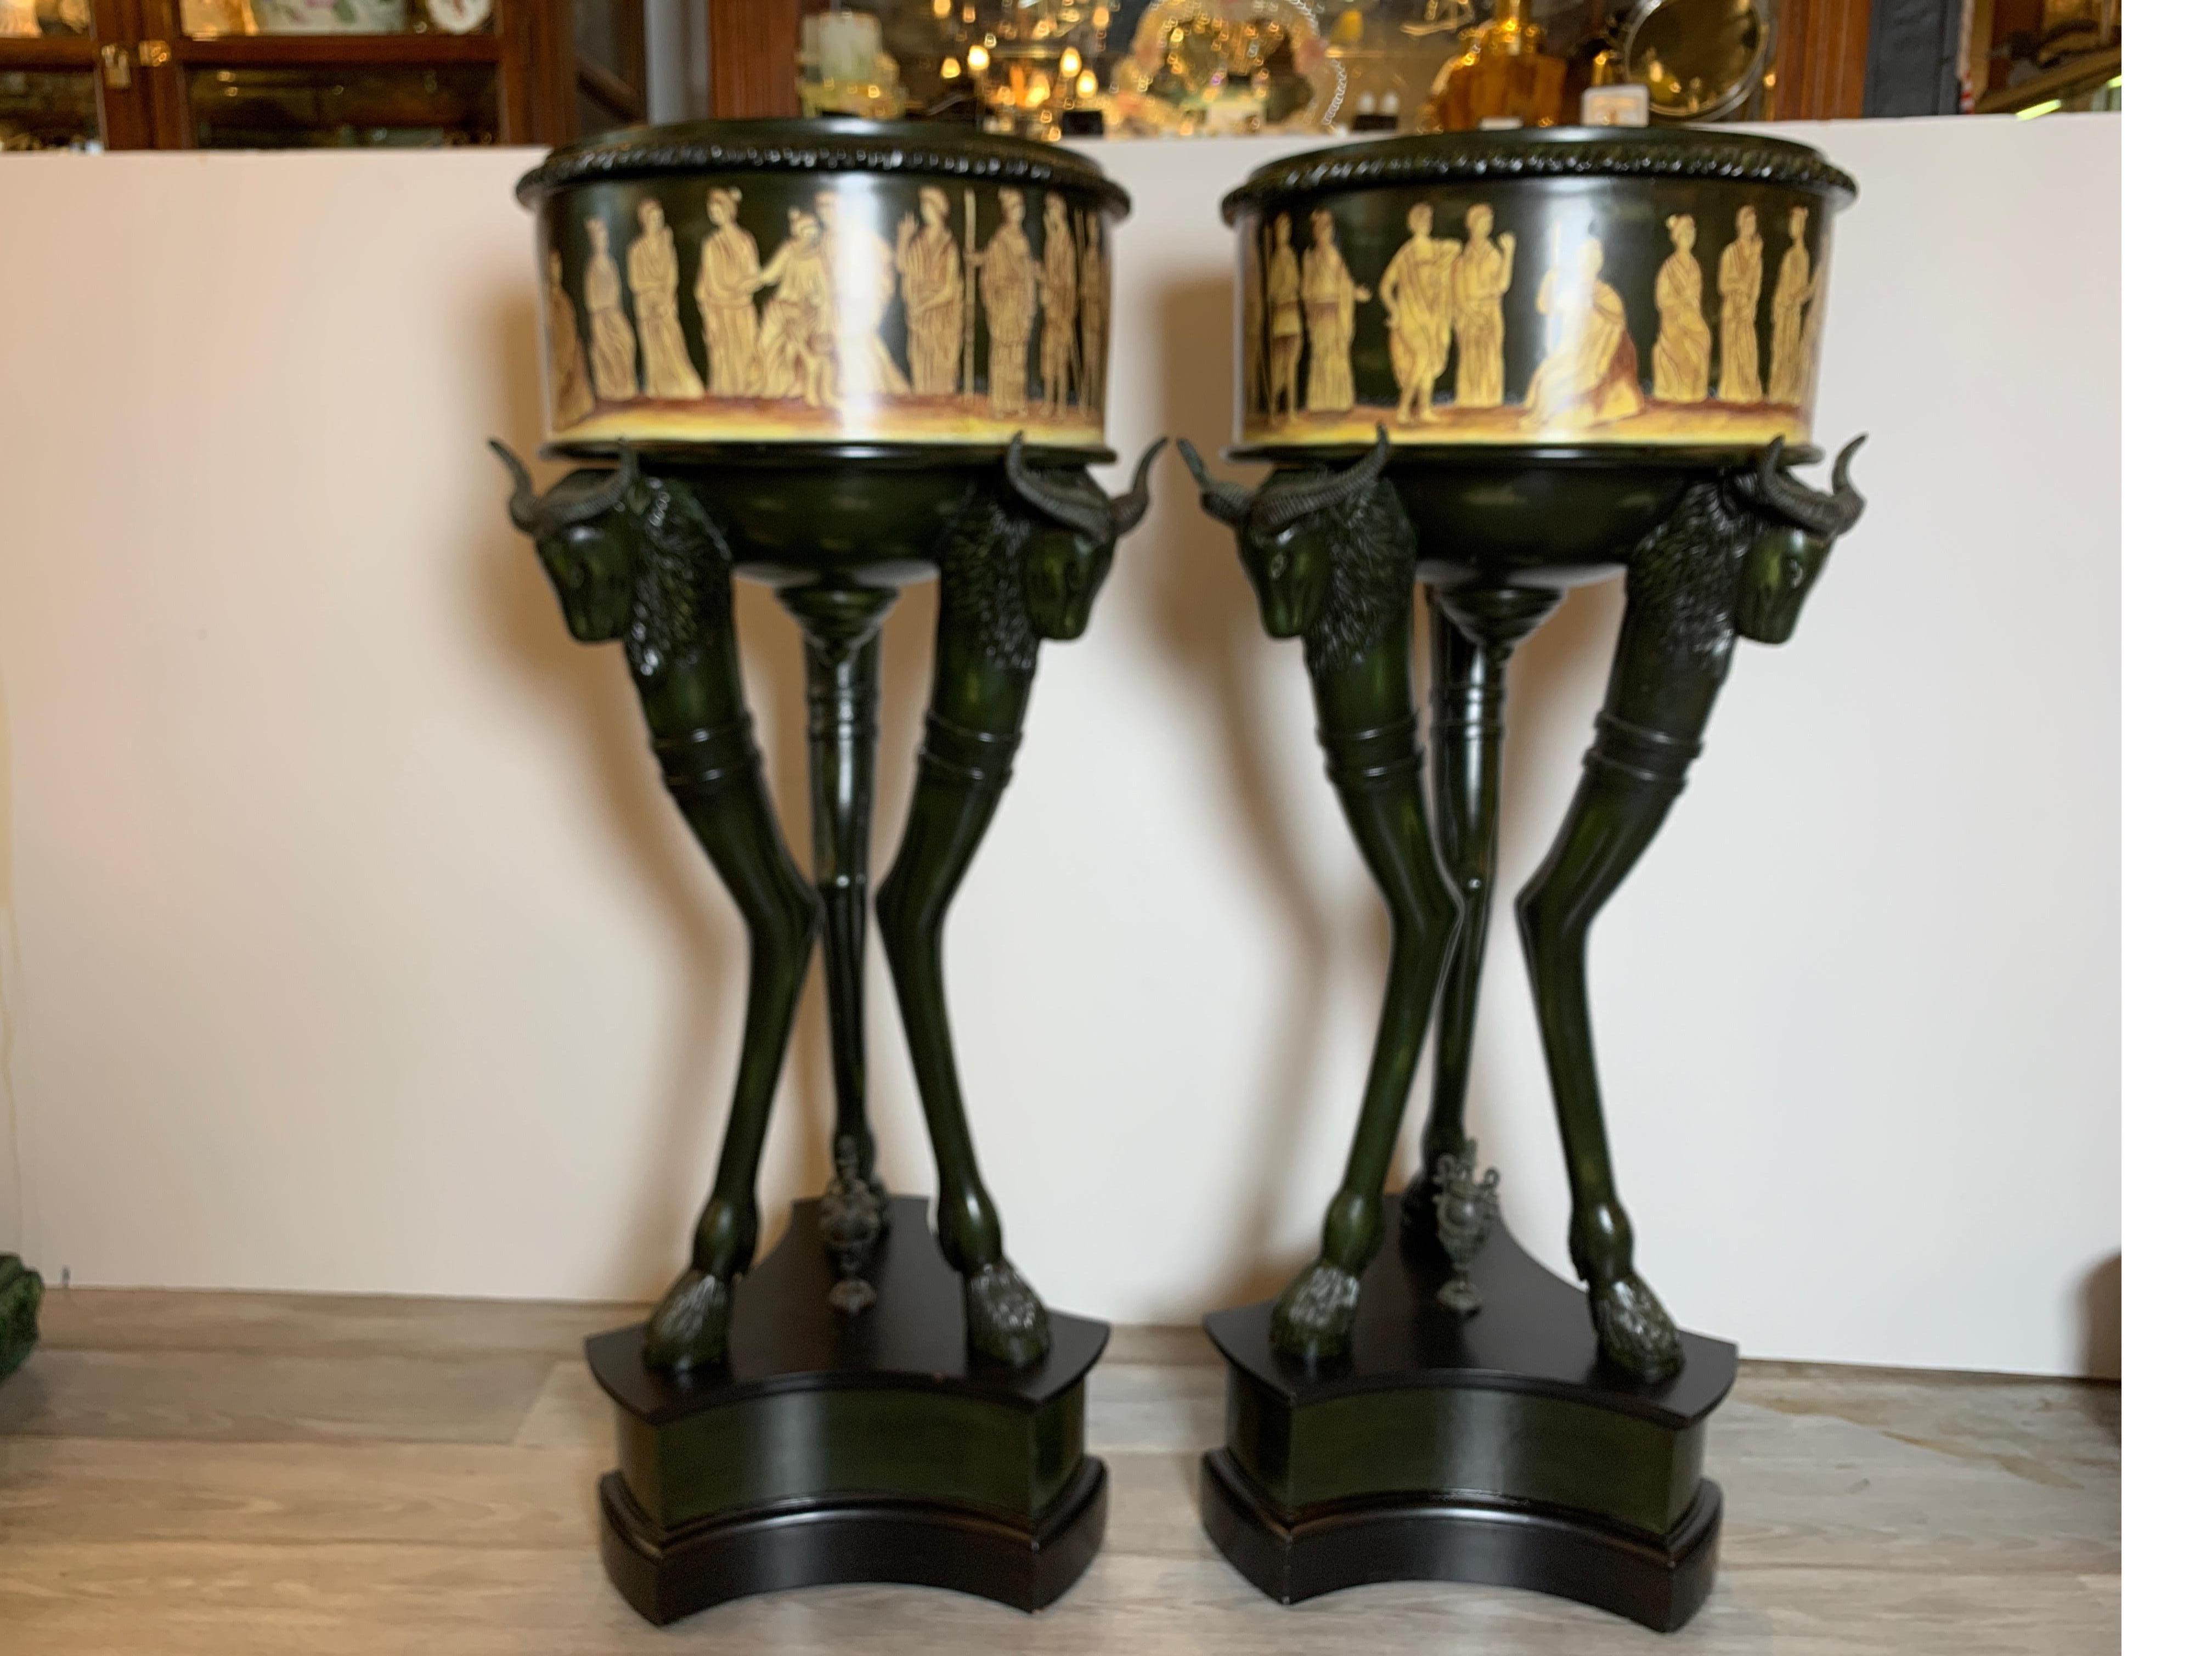 An exotic pair of neoclassical tall planters by Maitland Smith. The planters with hand painted neoclassical figures around the outside supported by three horned figures with hoofs at the bottom. These also have the original patinated copper inserts.